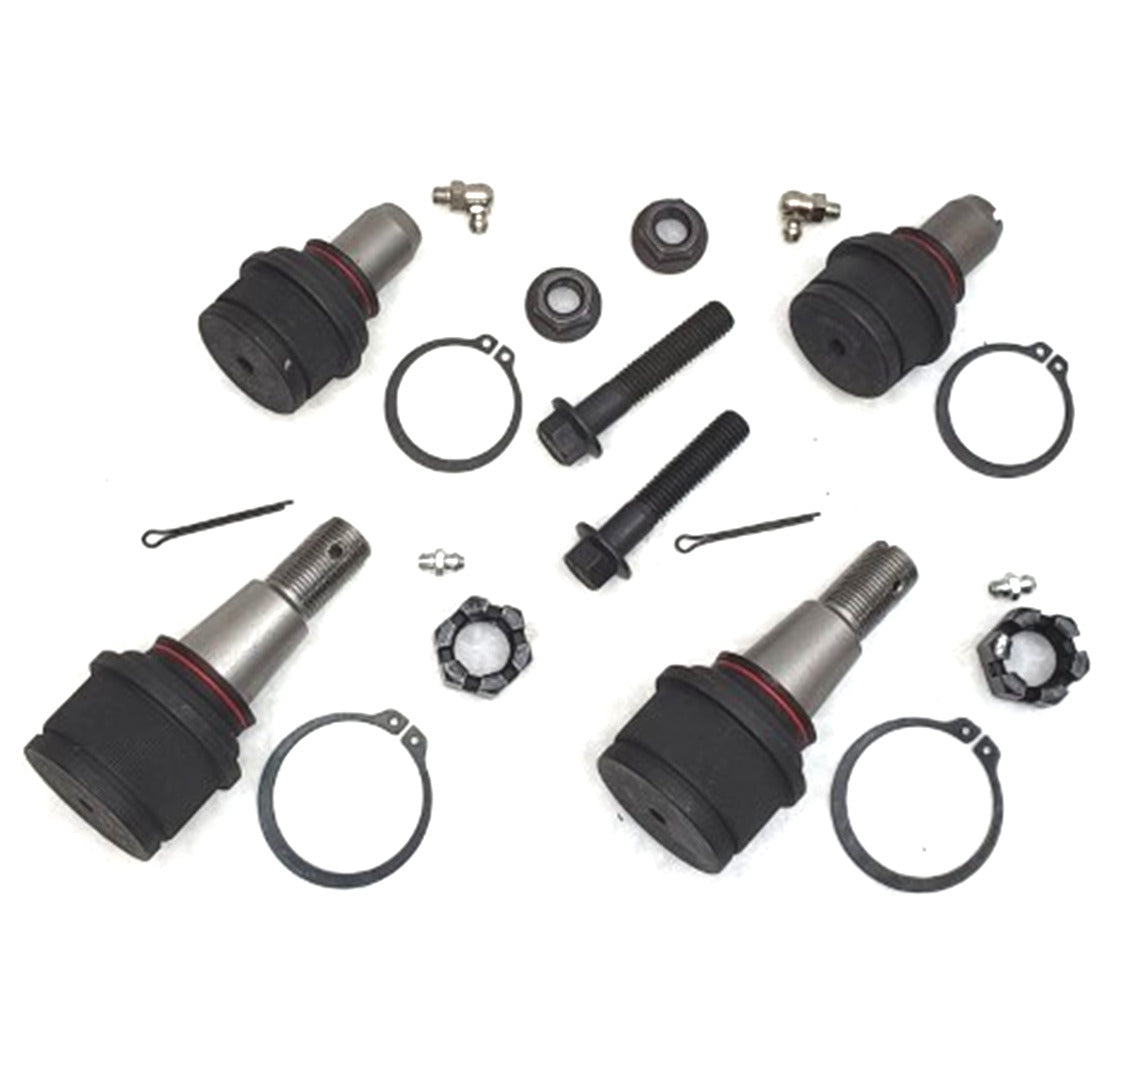 XRF Ball Joints Upper and Lower Suspension Kit for 2007-2014 Ford E150 2WD